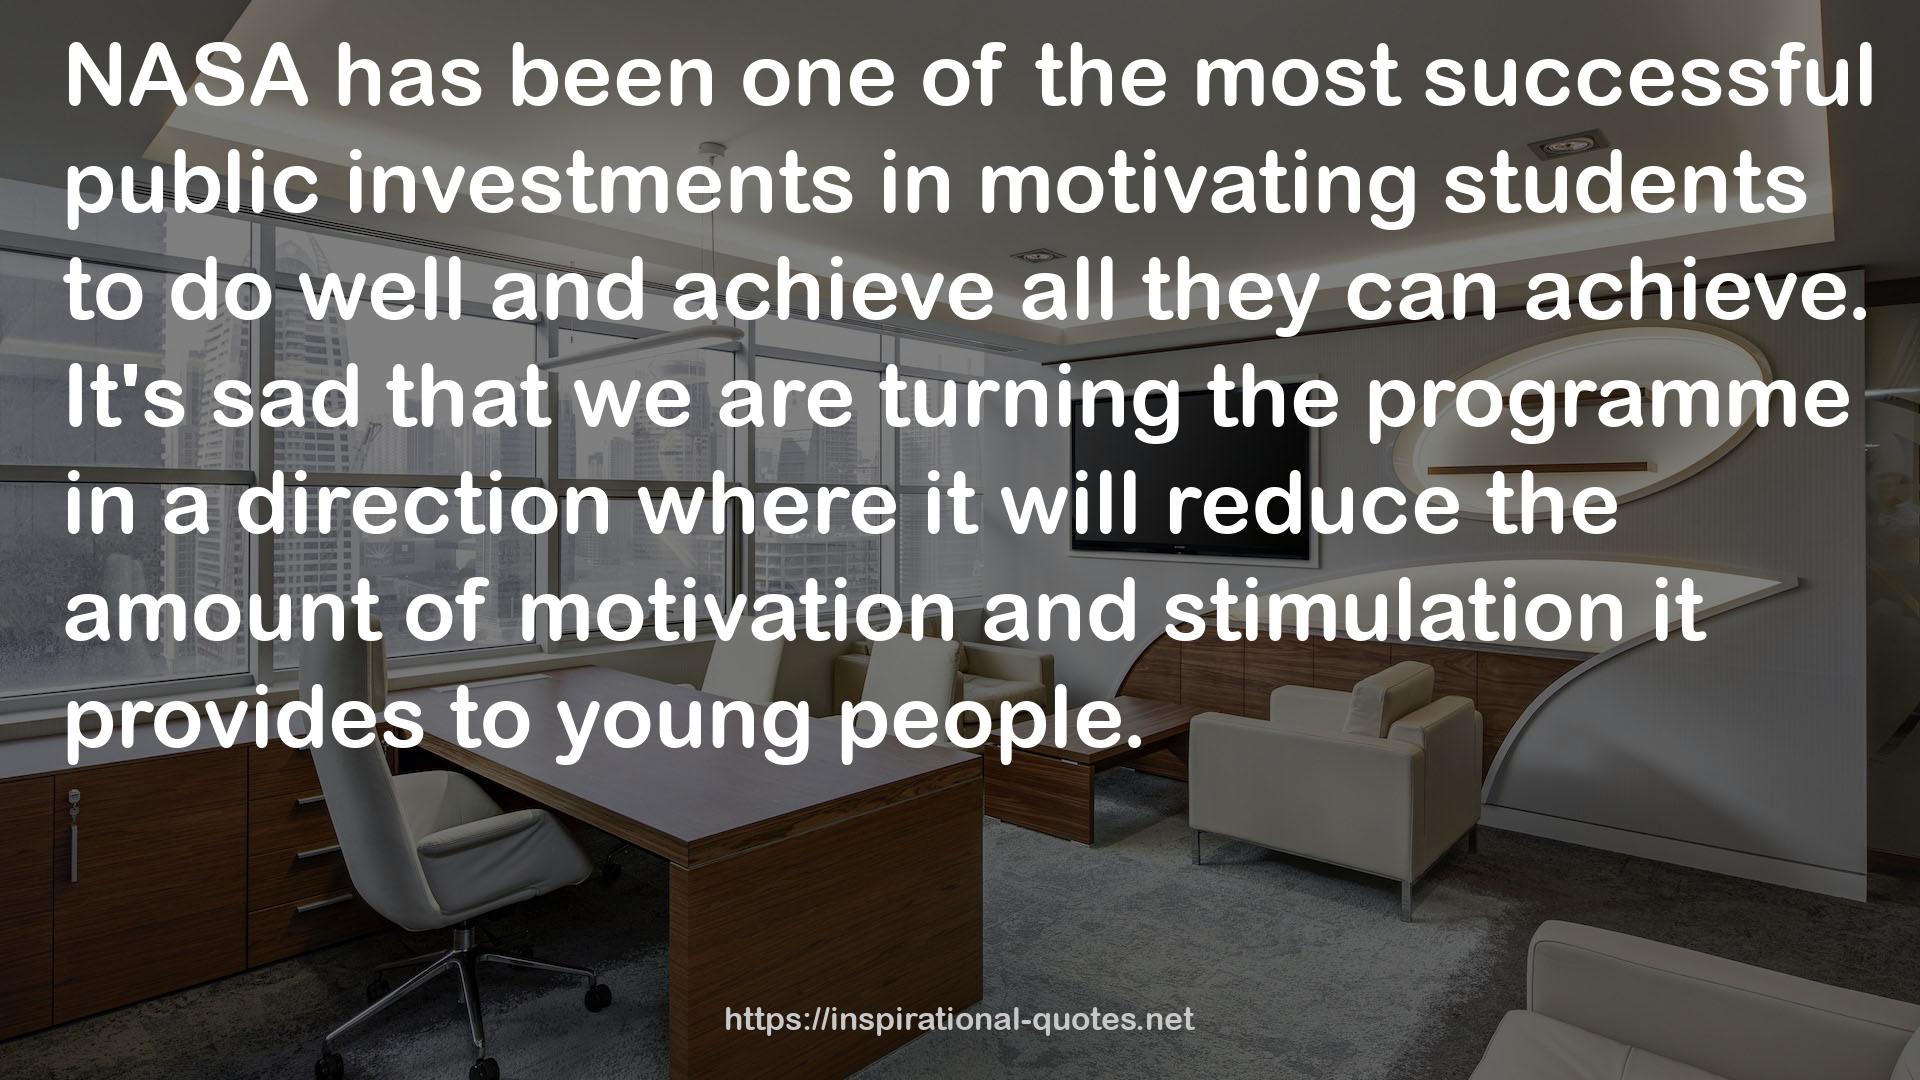 the most successful public investments  QUOTES